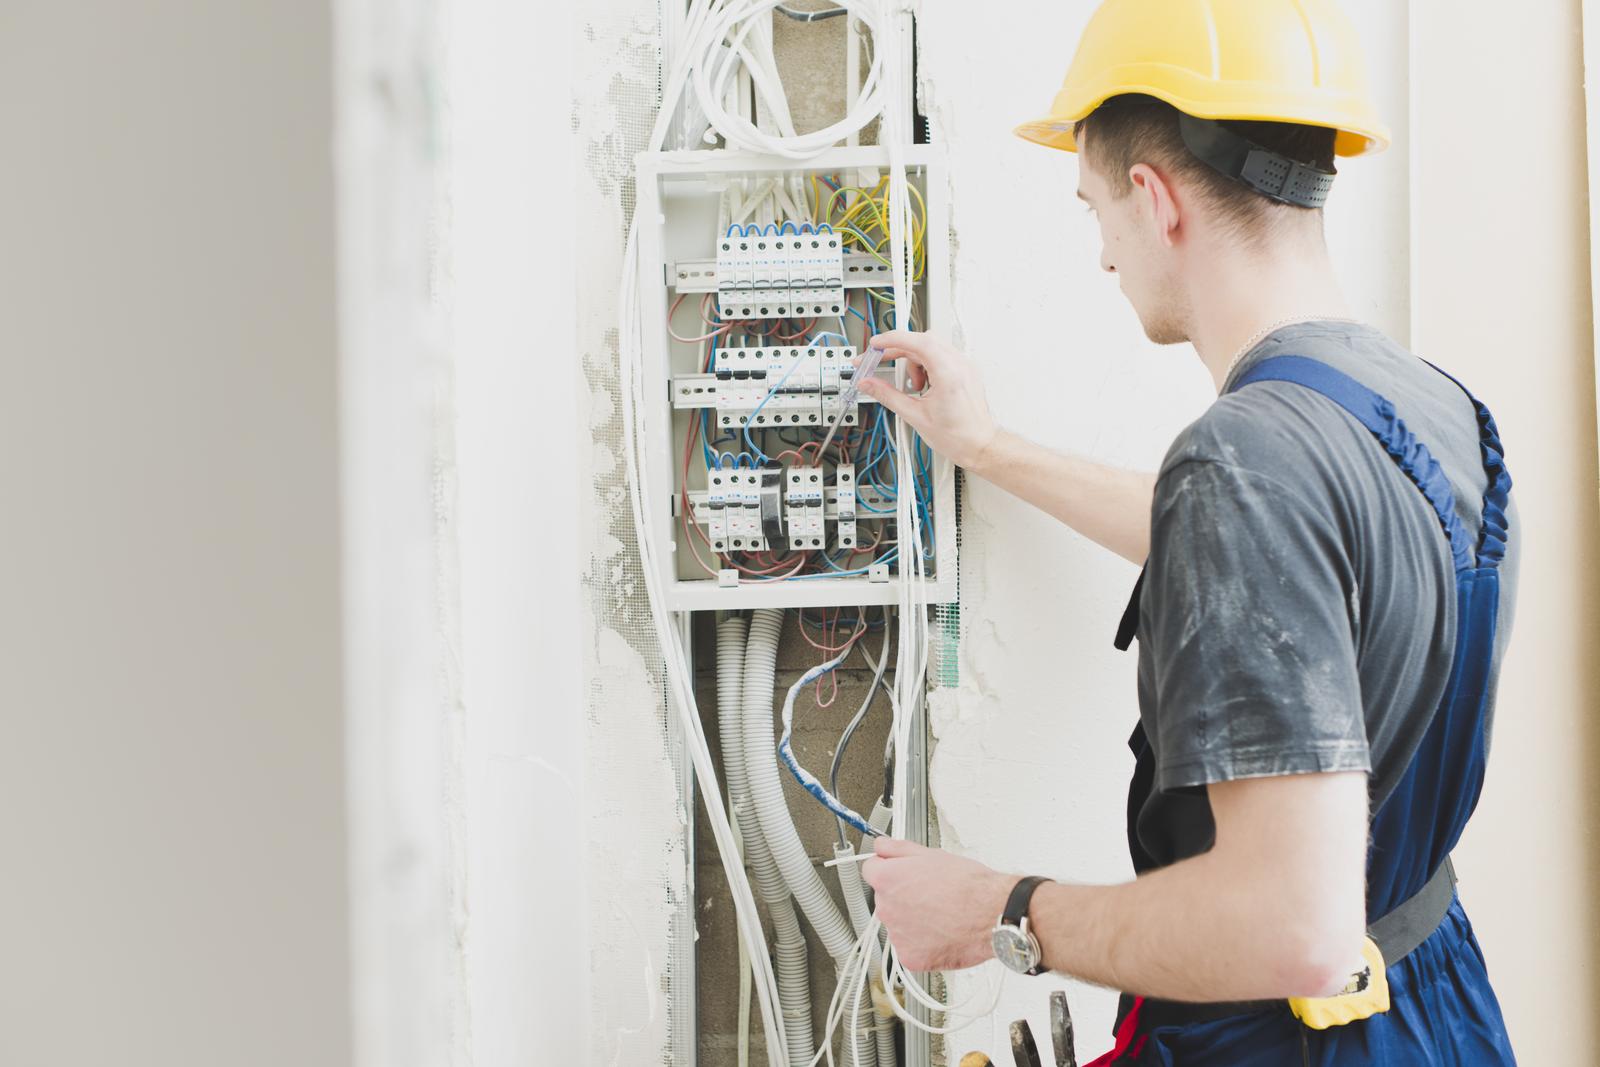 Electrical installation service